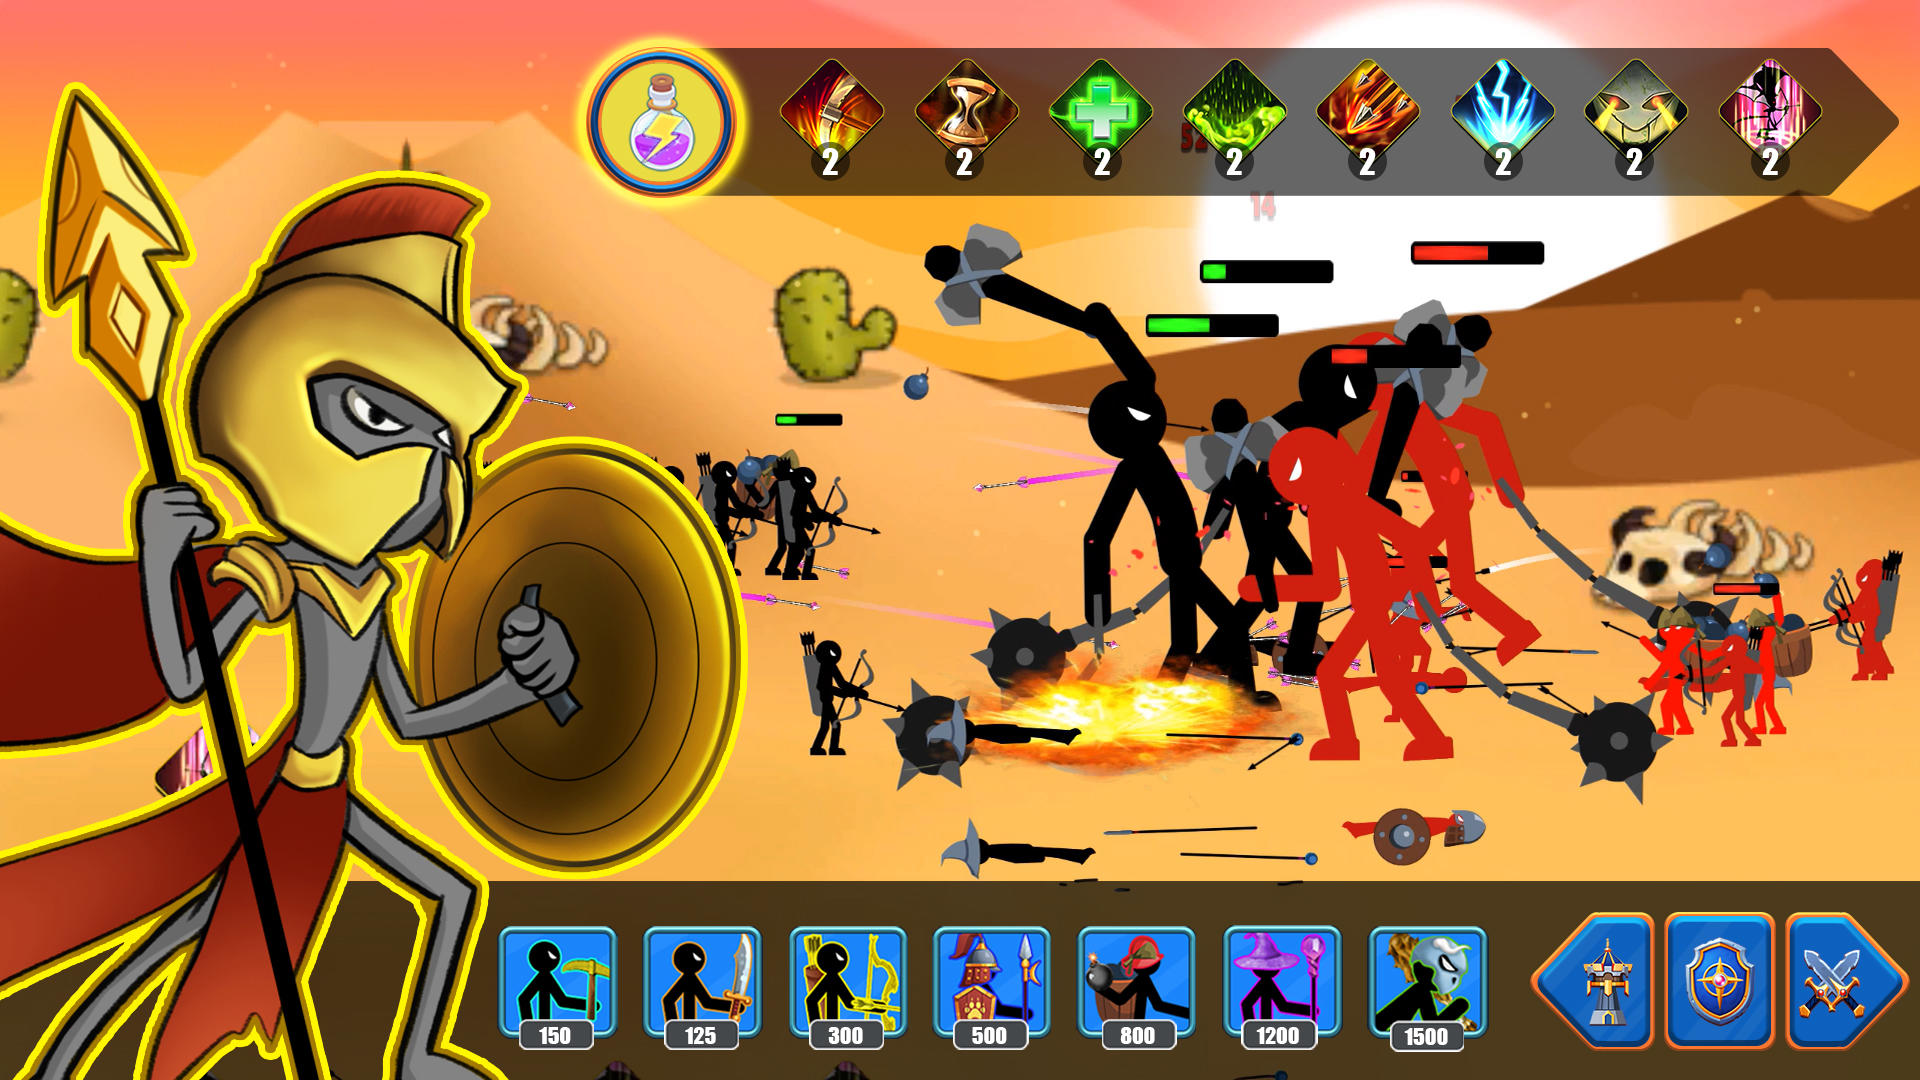 Download Stickman War: Stick Fight Army android on PC